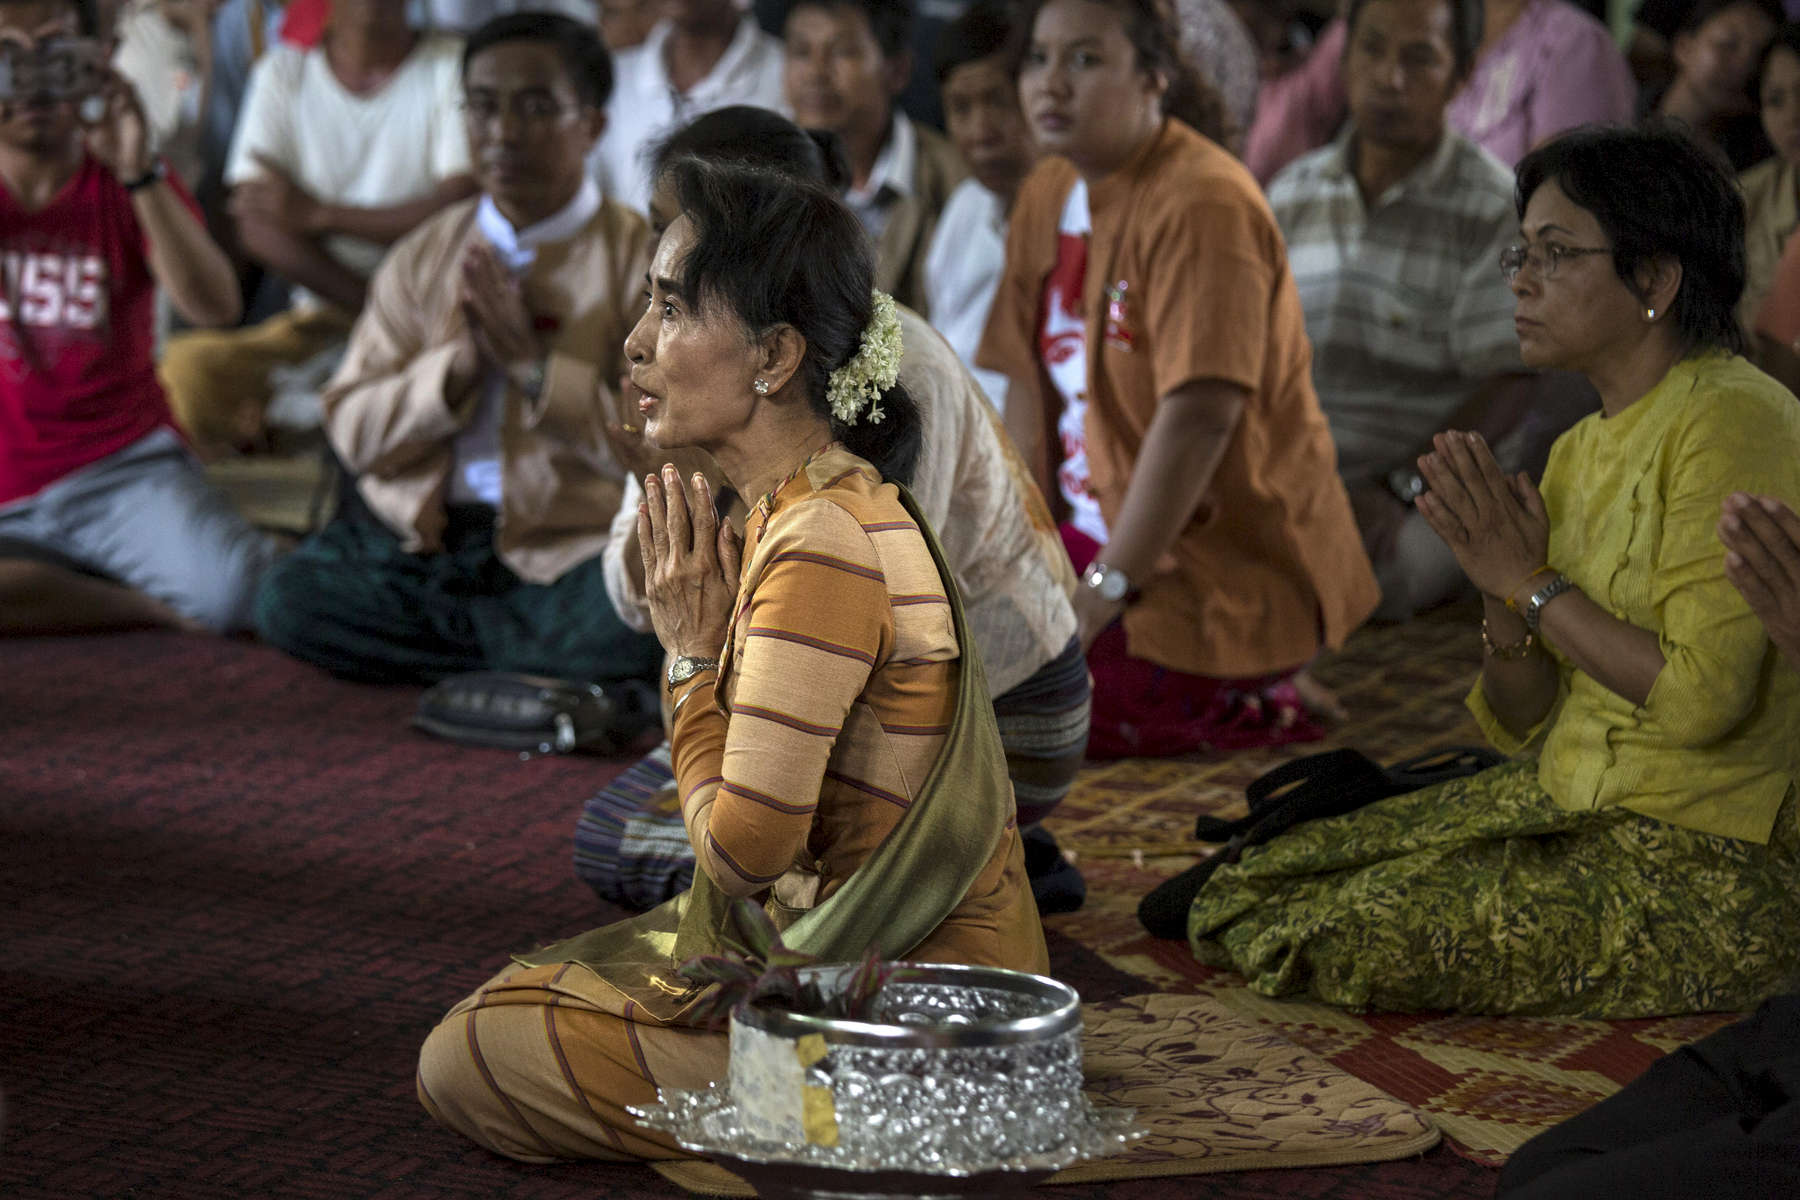 Hsih Seng: Aung San Suu Kyi prays at a local monastery as she visits with monks during an early election campaign visit to Shan state.Paula Bronsteinfor Der Spiegel / Getty Images Reportage